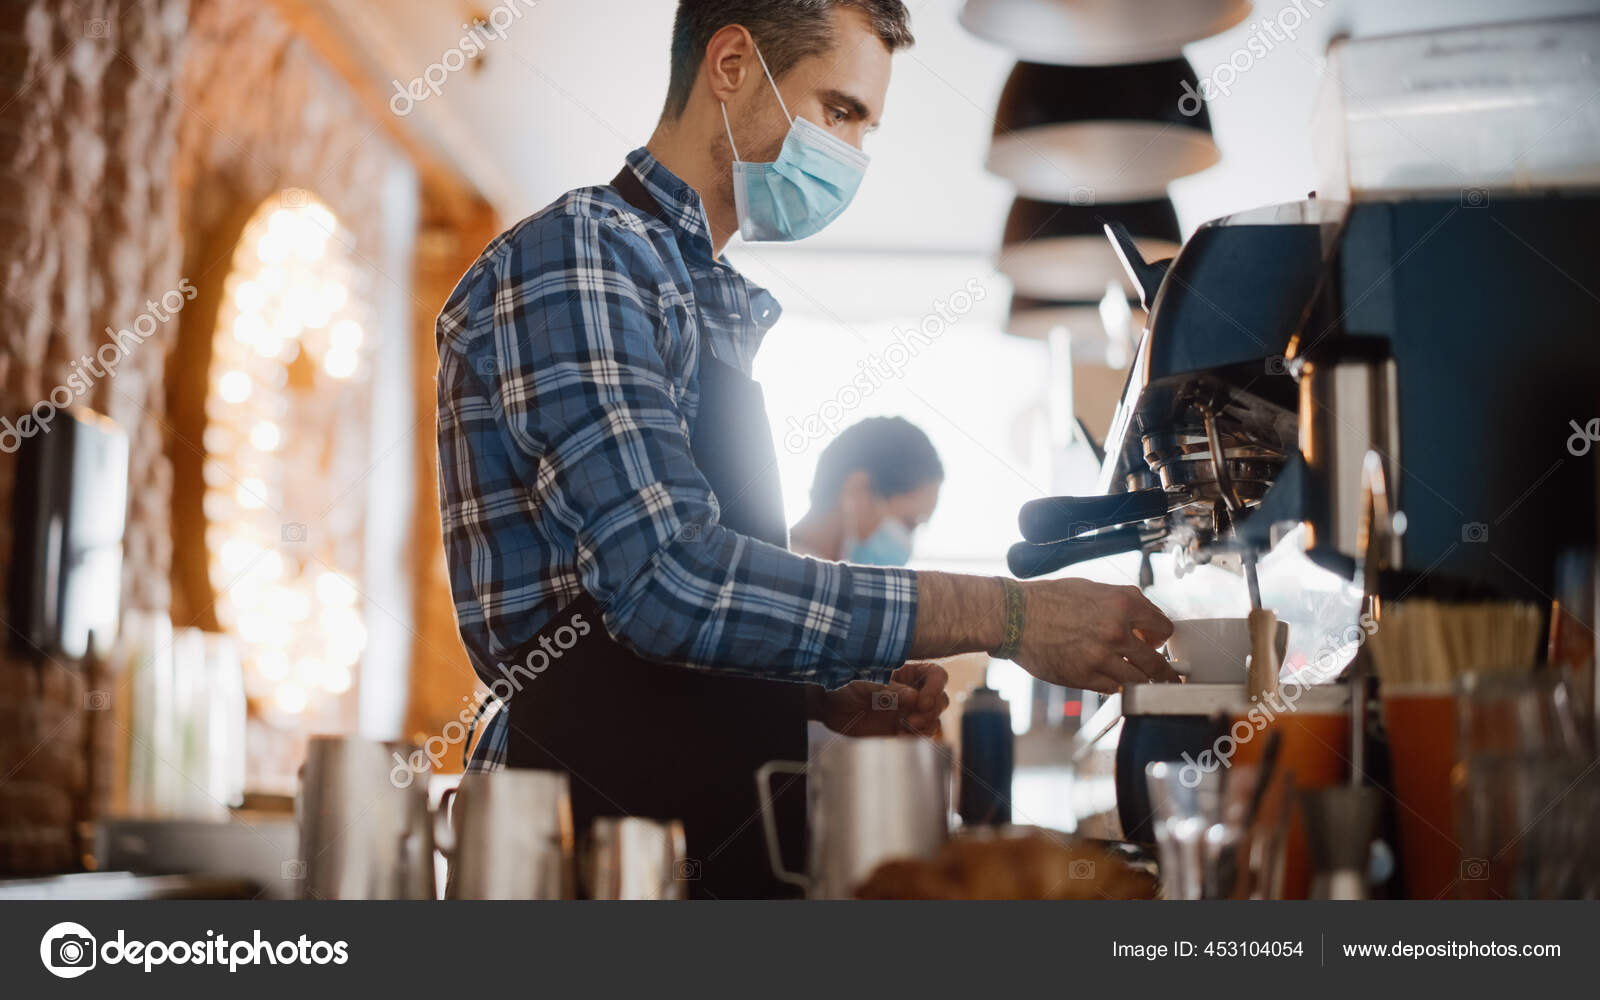 Beautiful Latin American Female Barista With Short Hair And Glasses Is  Making A Cup Of Tasty Cappuccino In Coffee Shop Bar Portrait Of Happy  Employee Behind Cozy Loftstyle Cafe Counter Stock Photo 